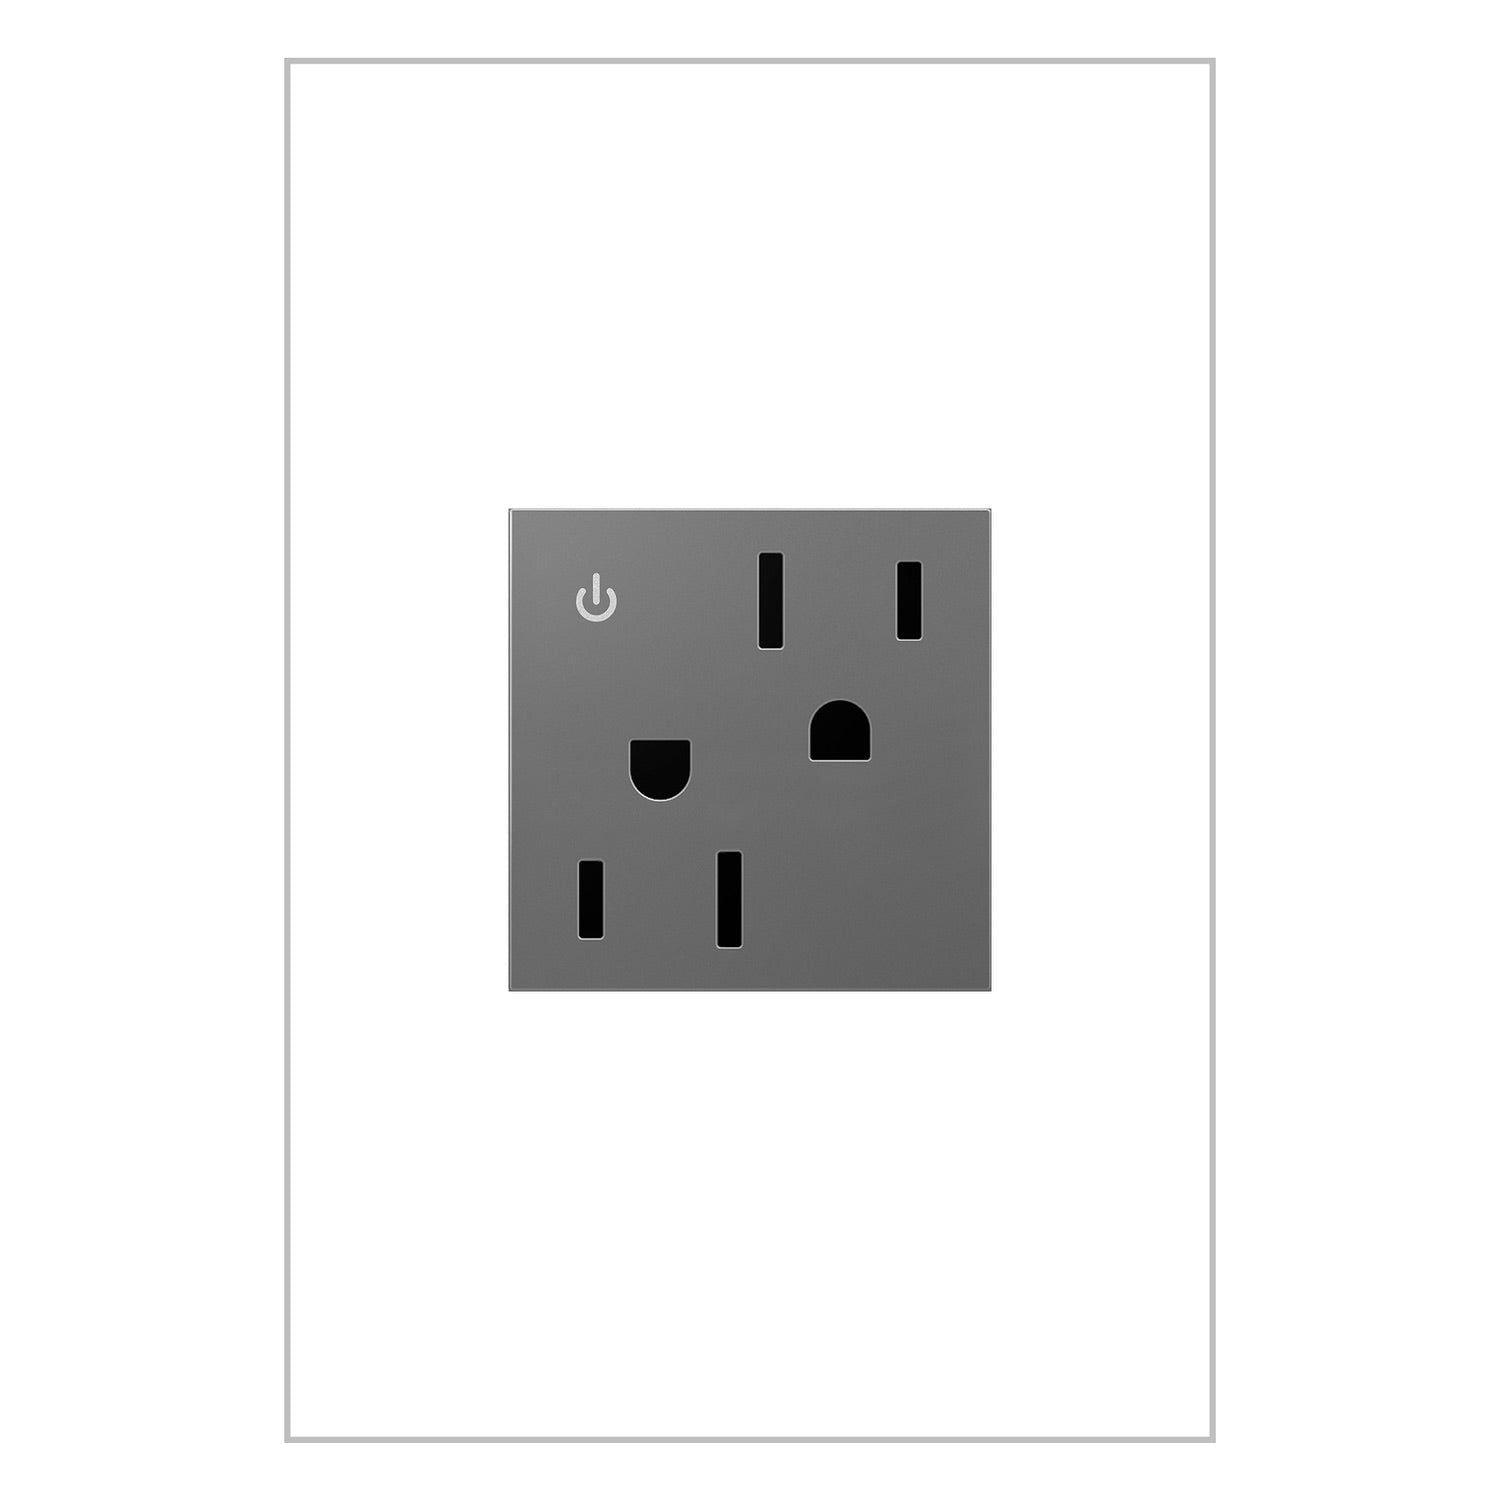 Legrand - 15A Tamper-Resistant Dual-Controlled Outlet - Lights Canada